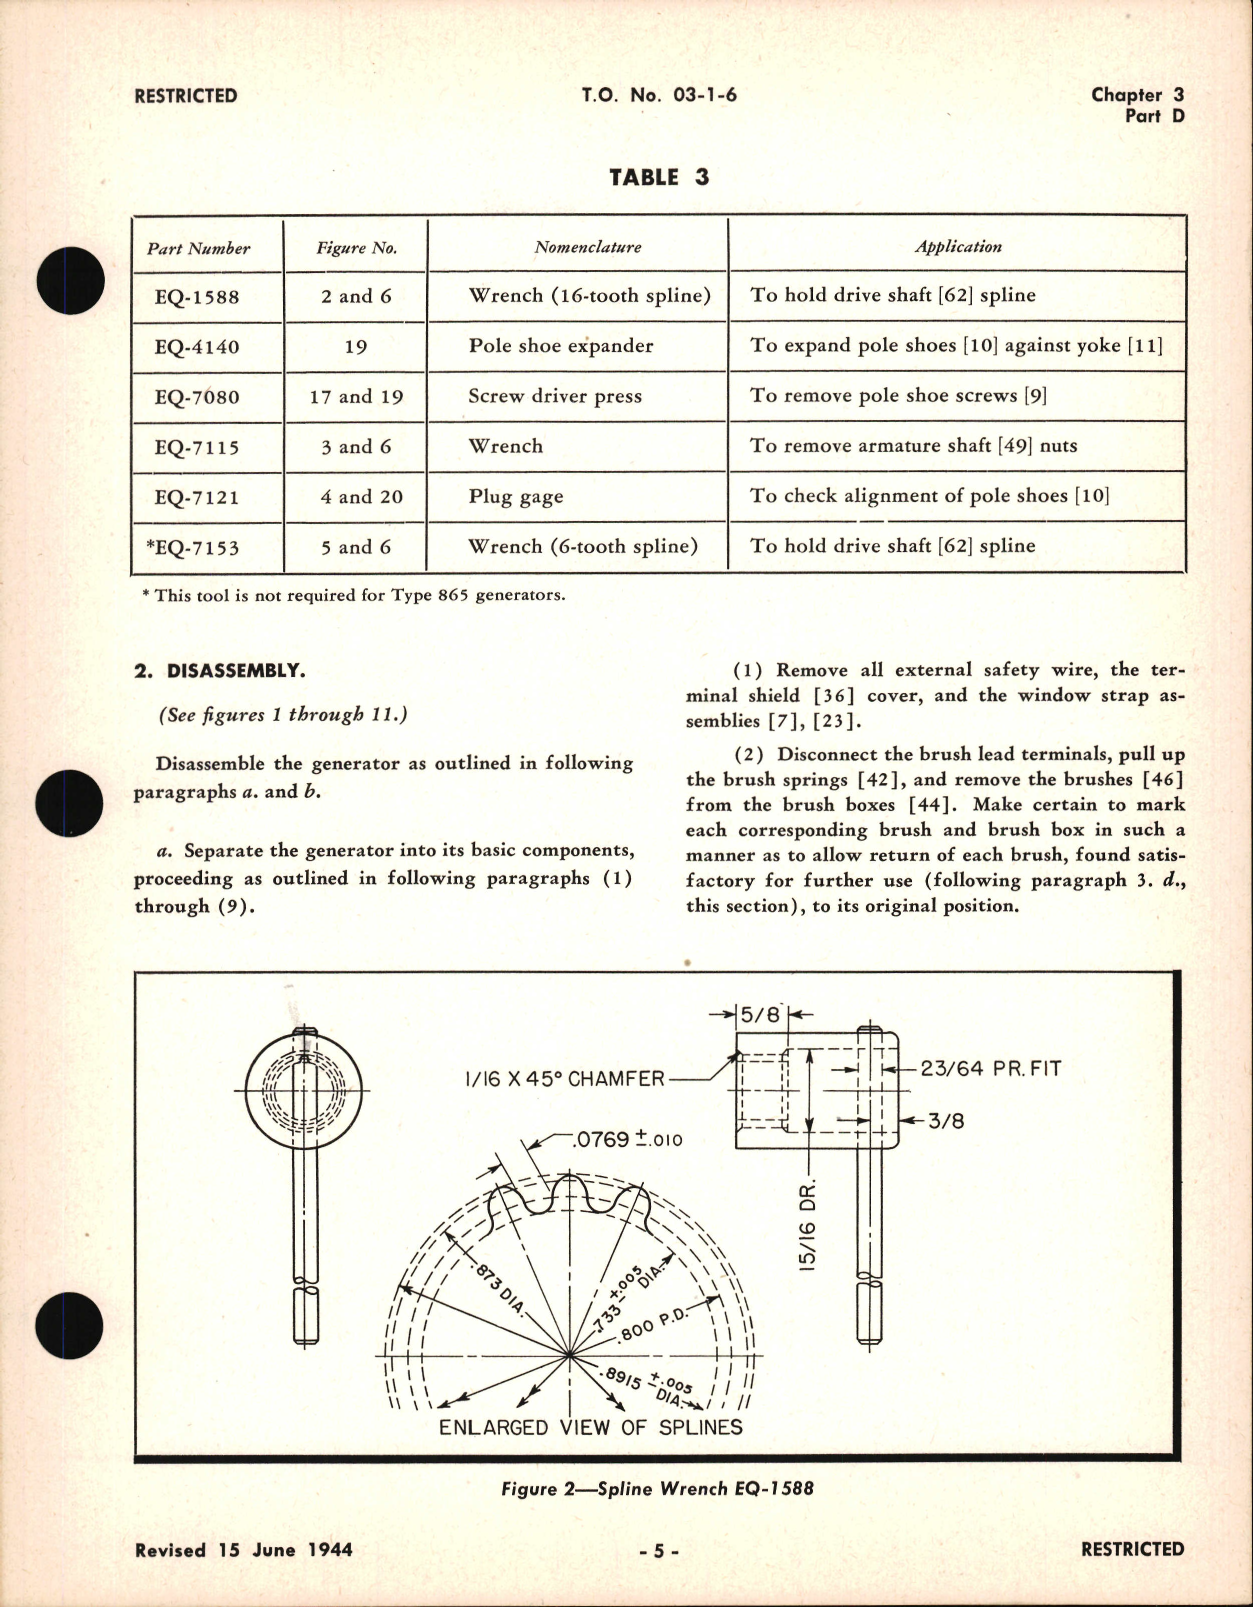 Sample page 5 from AirCorps Library document: Overhaul Instructions for Engine Driven Single Voltage D-C Generators